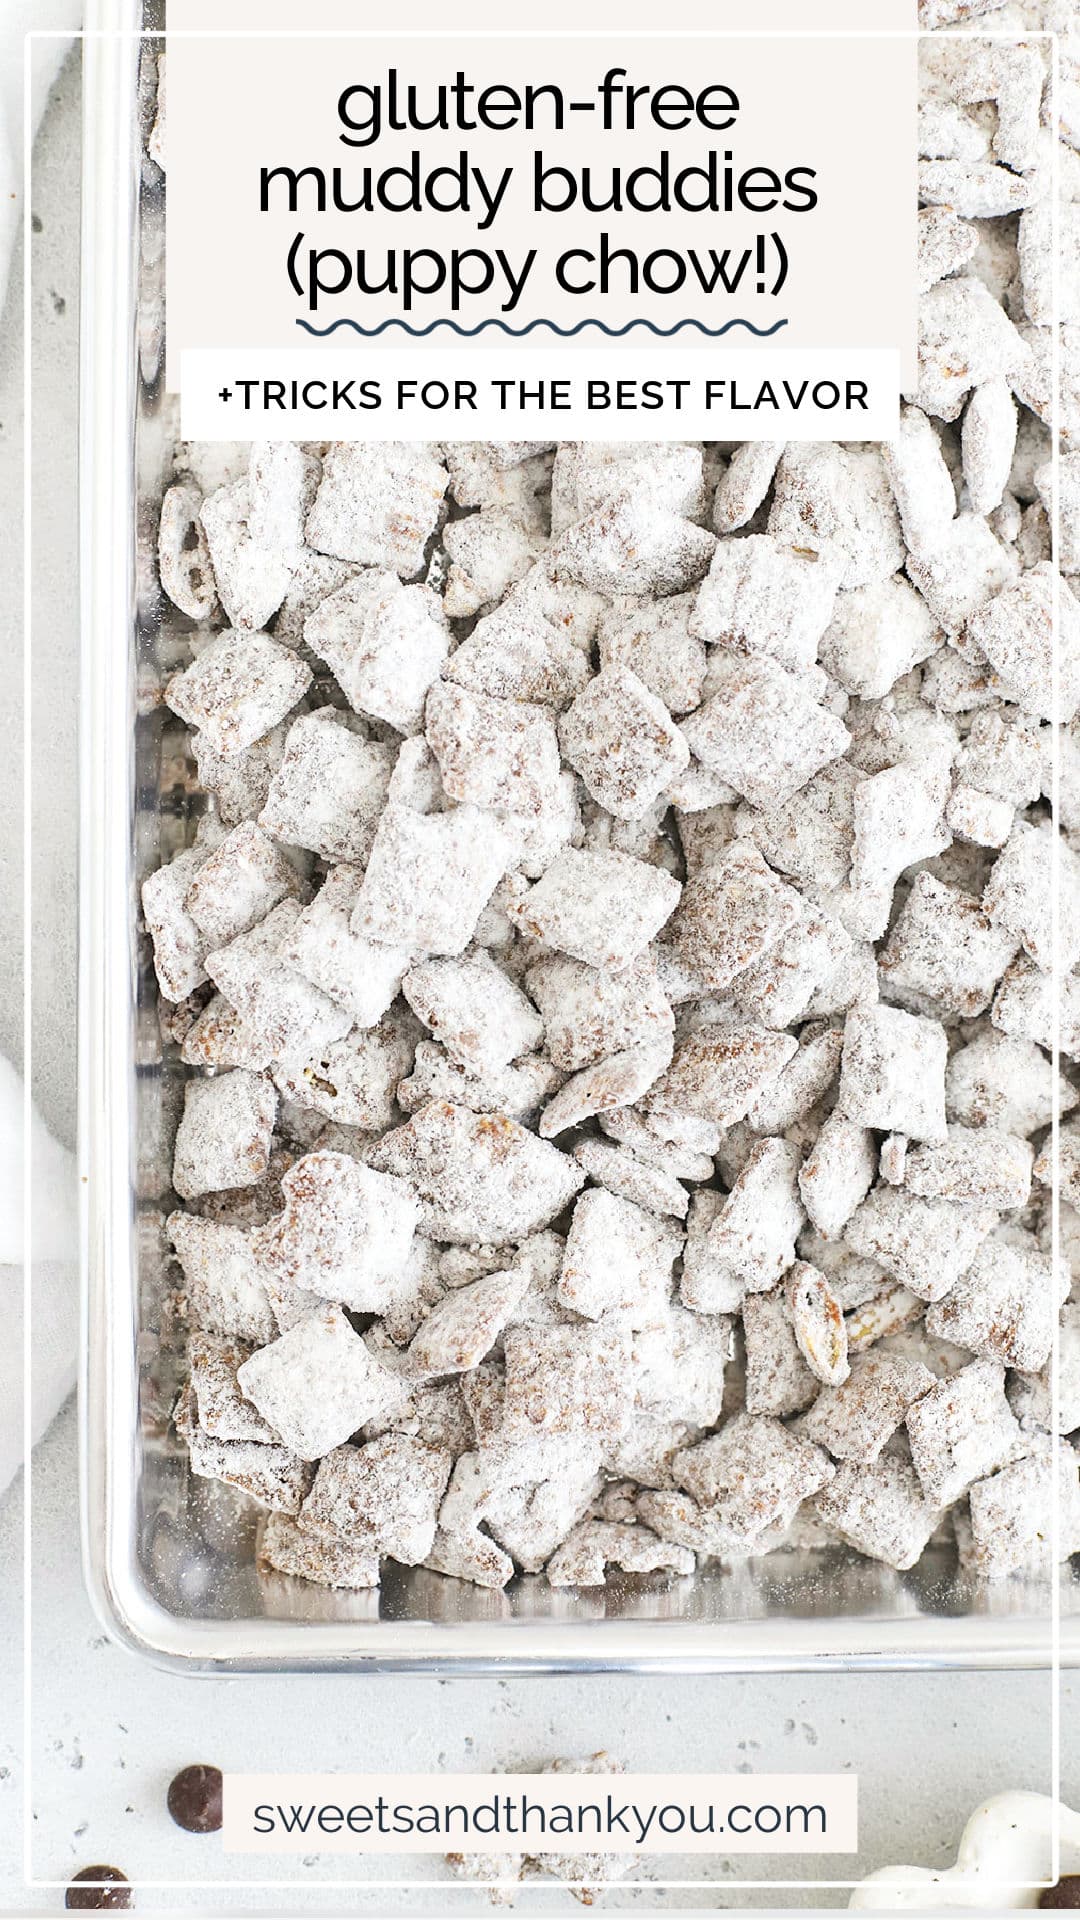 Learn how to make the BEST gluten-free muddy buddies (aka puppy chow) with our simple tricks. This classic no-bake treat has never been better! / gluten free puppy chow recipe / classic puppy chow / classic muddy buddies / gluten free muddy buddy recipe / how to make muddy buddy clusters / are muddy buddies gluten free / is puppy chow gluten free / gluten free no bake treat / gluten free no bake snack / gluten free party snack